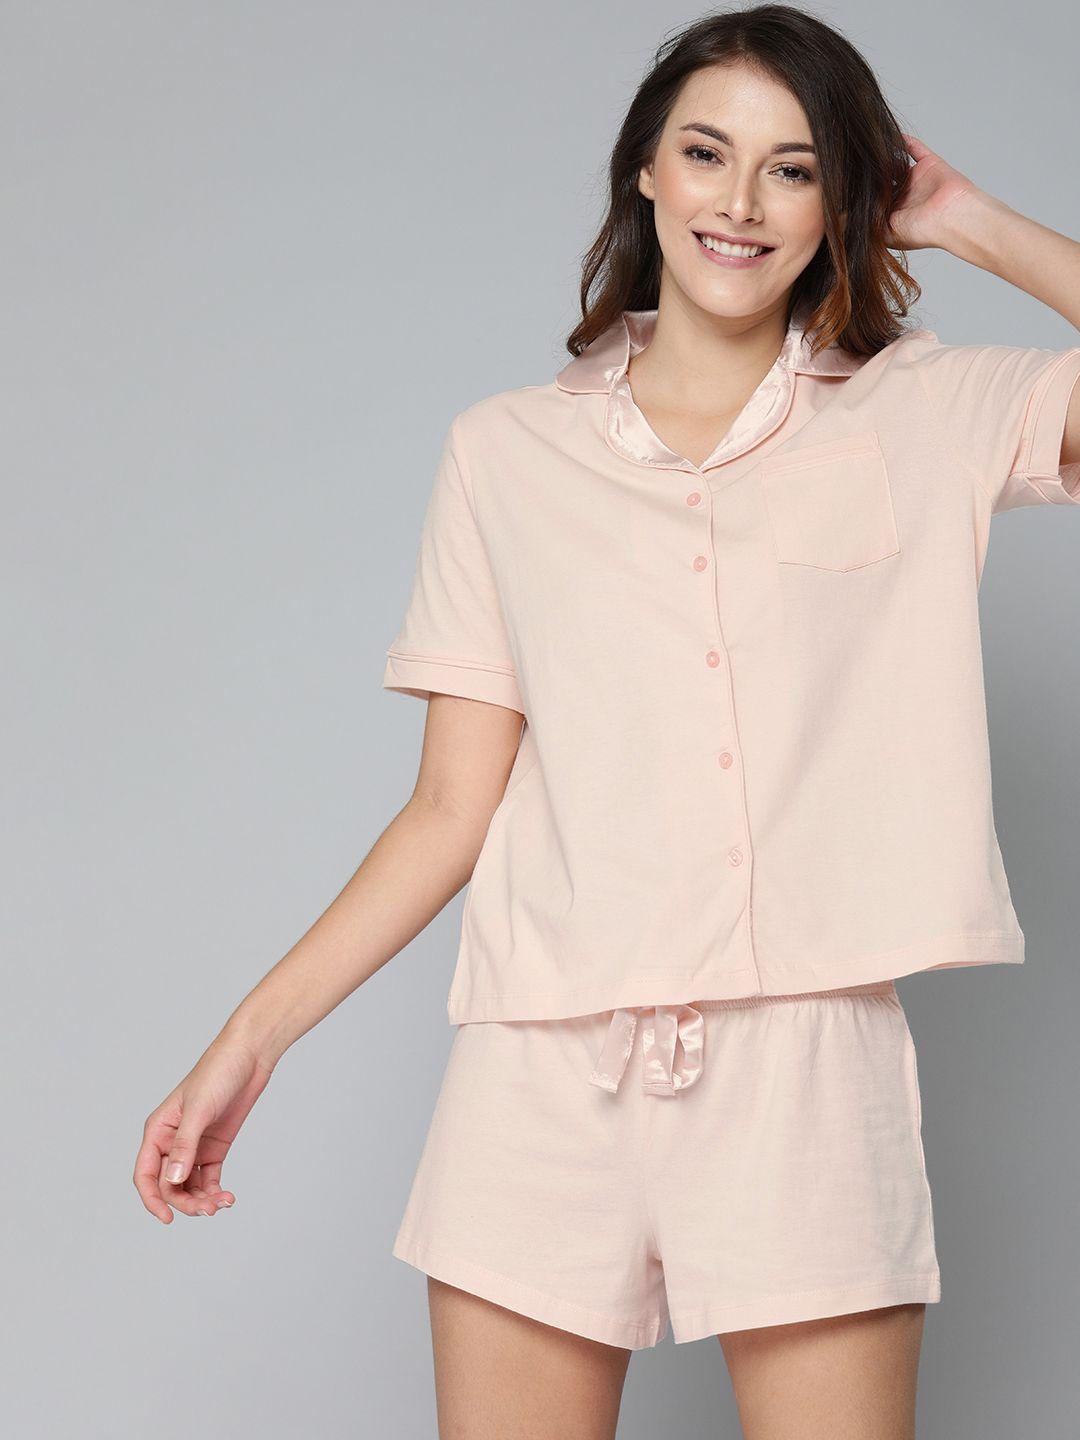 here&now-women-peach-coloured-solid-night-suit